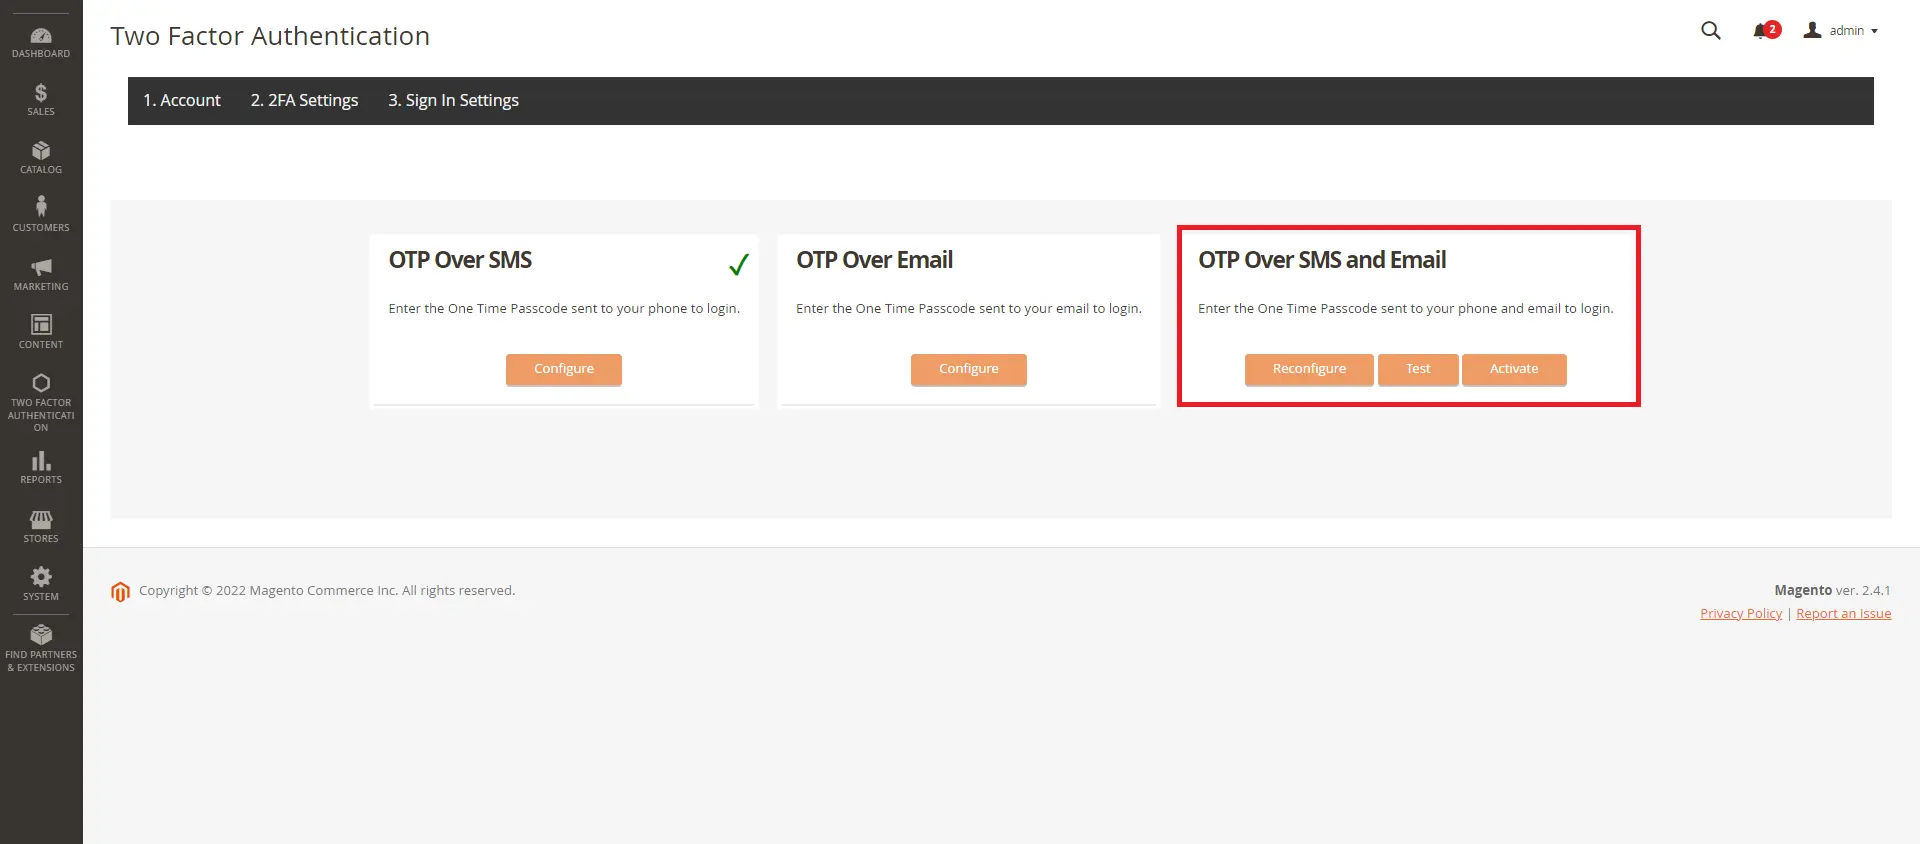 Magento 2 Factor Authentication (2fa) (mfa) OTP over SMS and Email